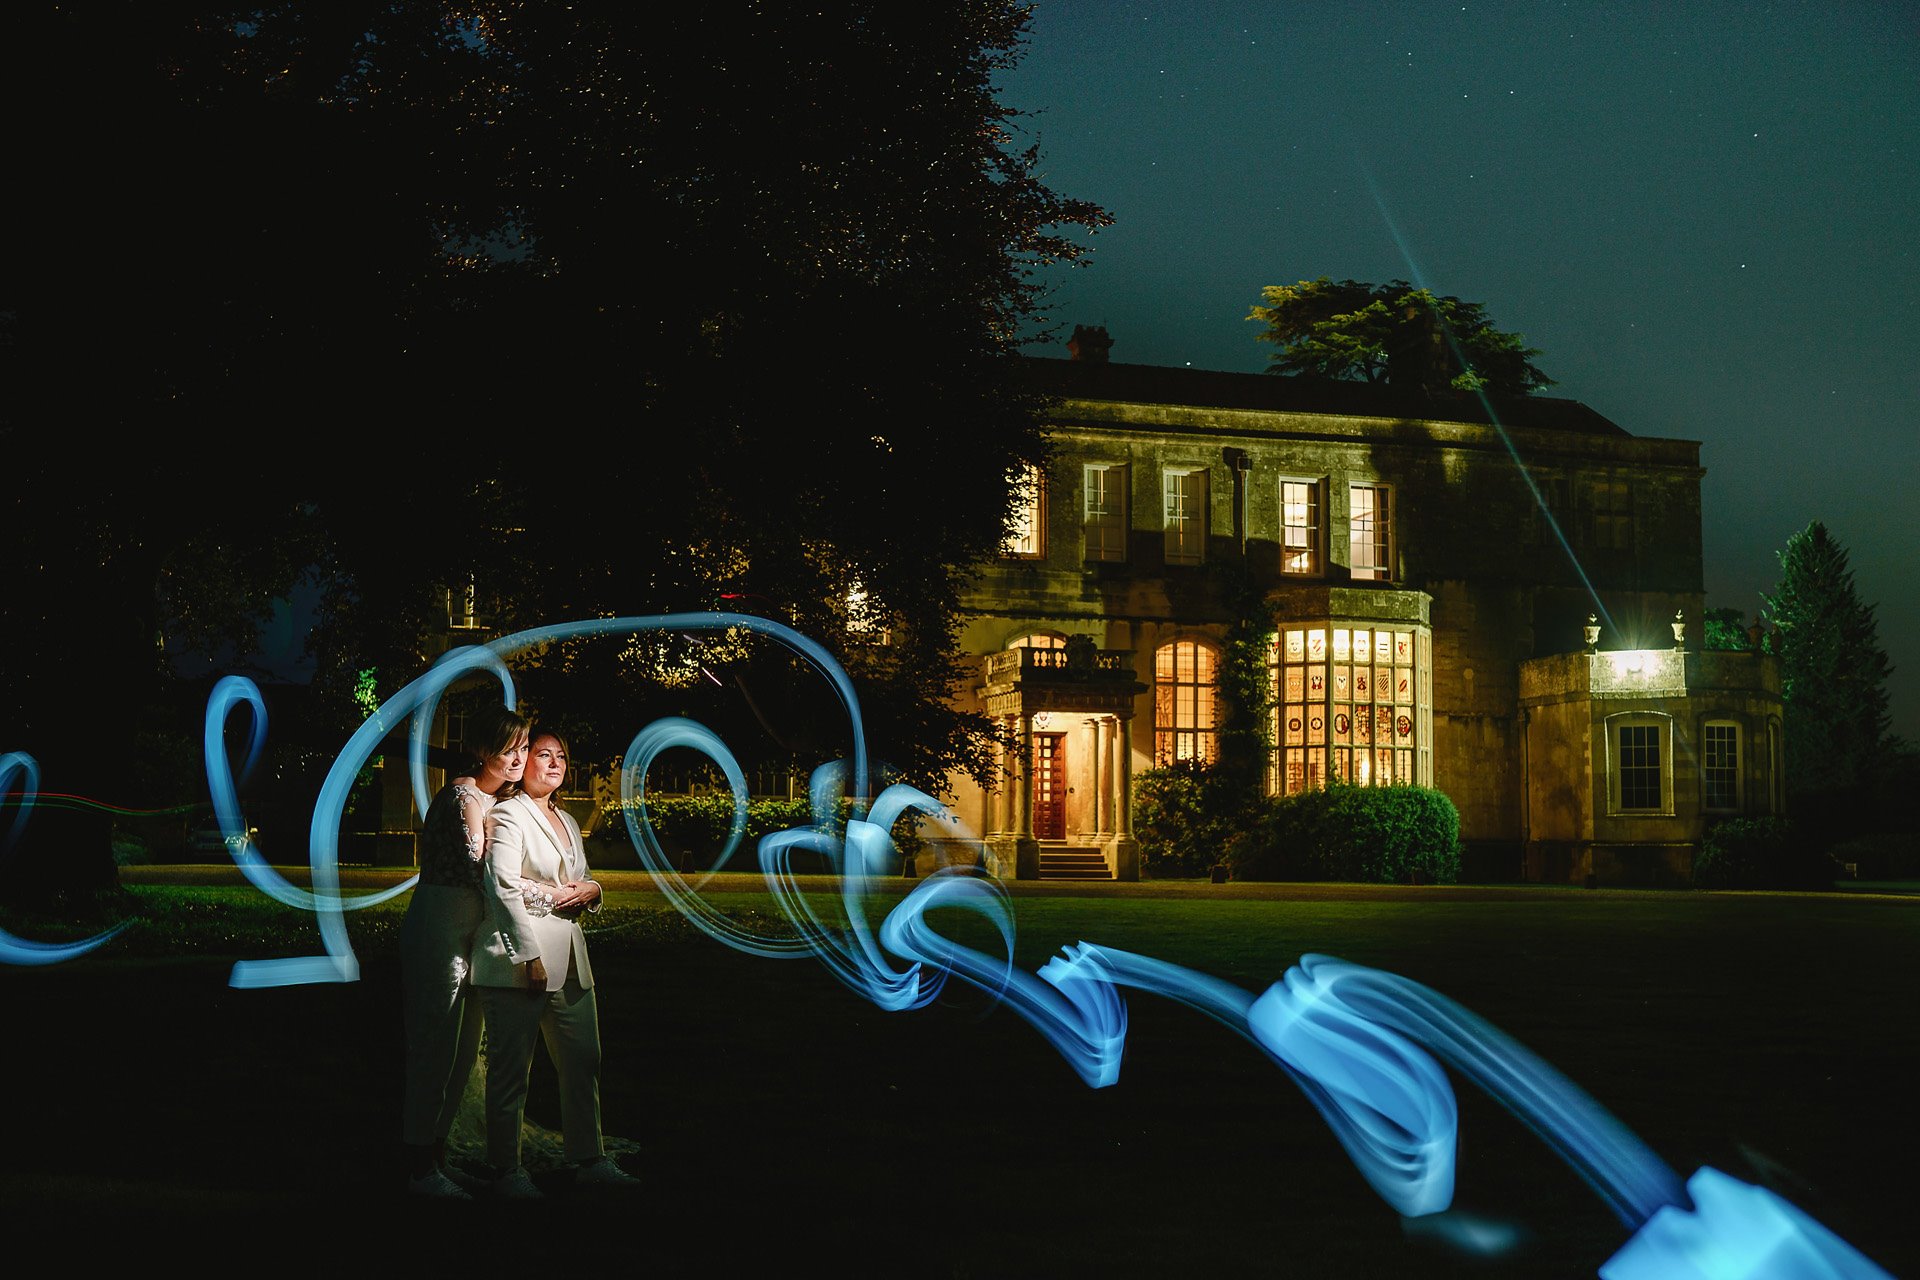 Lesbian wedding couple outside their stately home wedding venue lit up at night